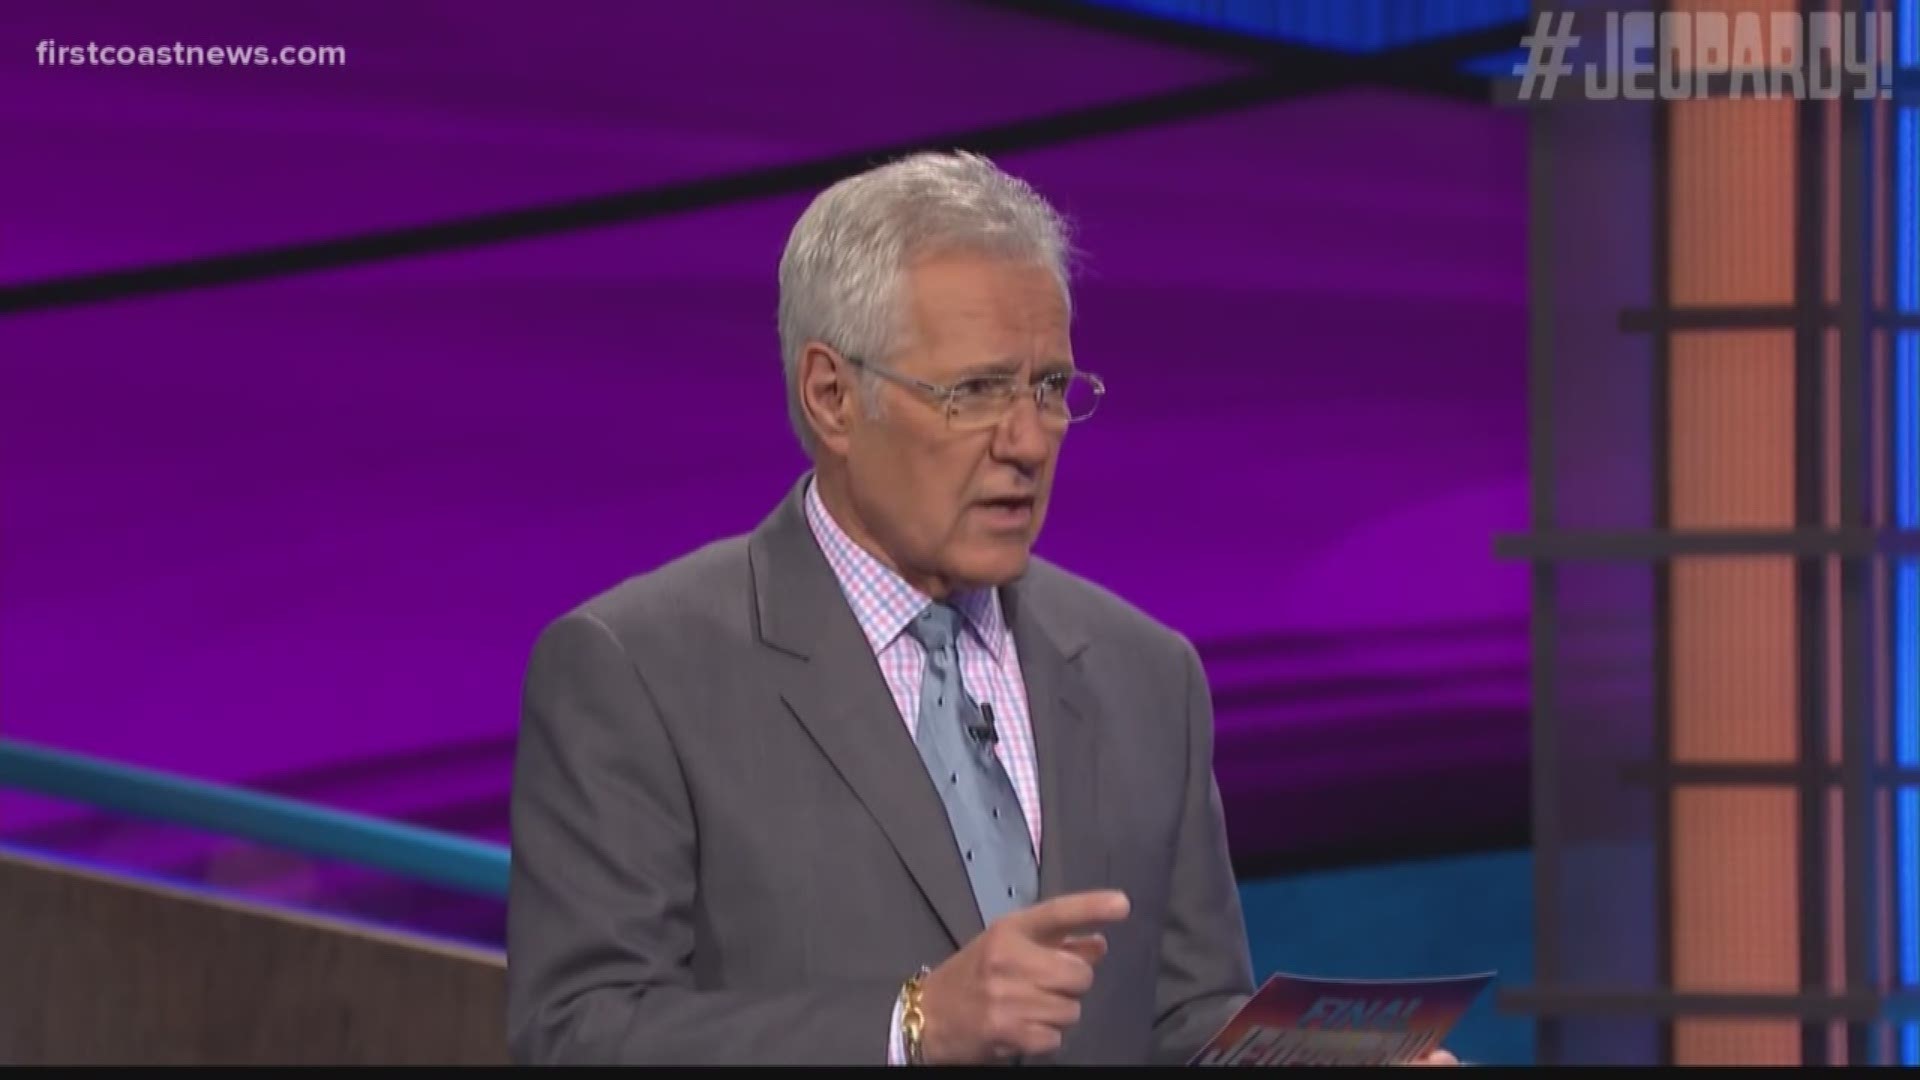 The chances of Alex Trebek returning to "Jeopardy" are "50-50 and a little less" once his contract ends in 2020, he says.